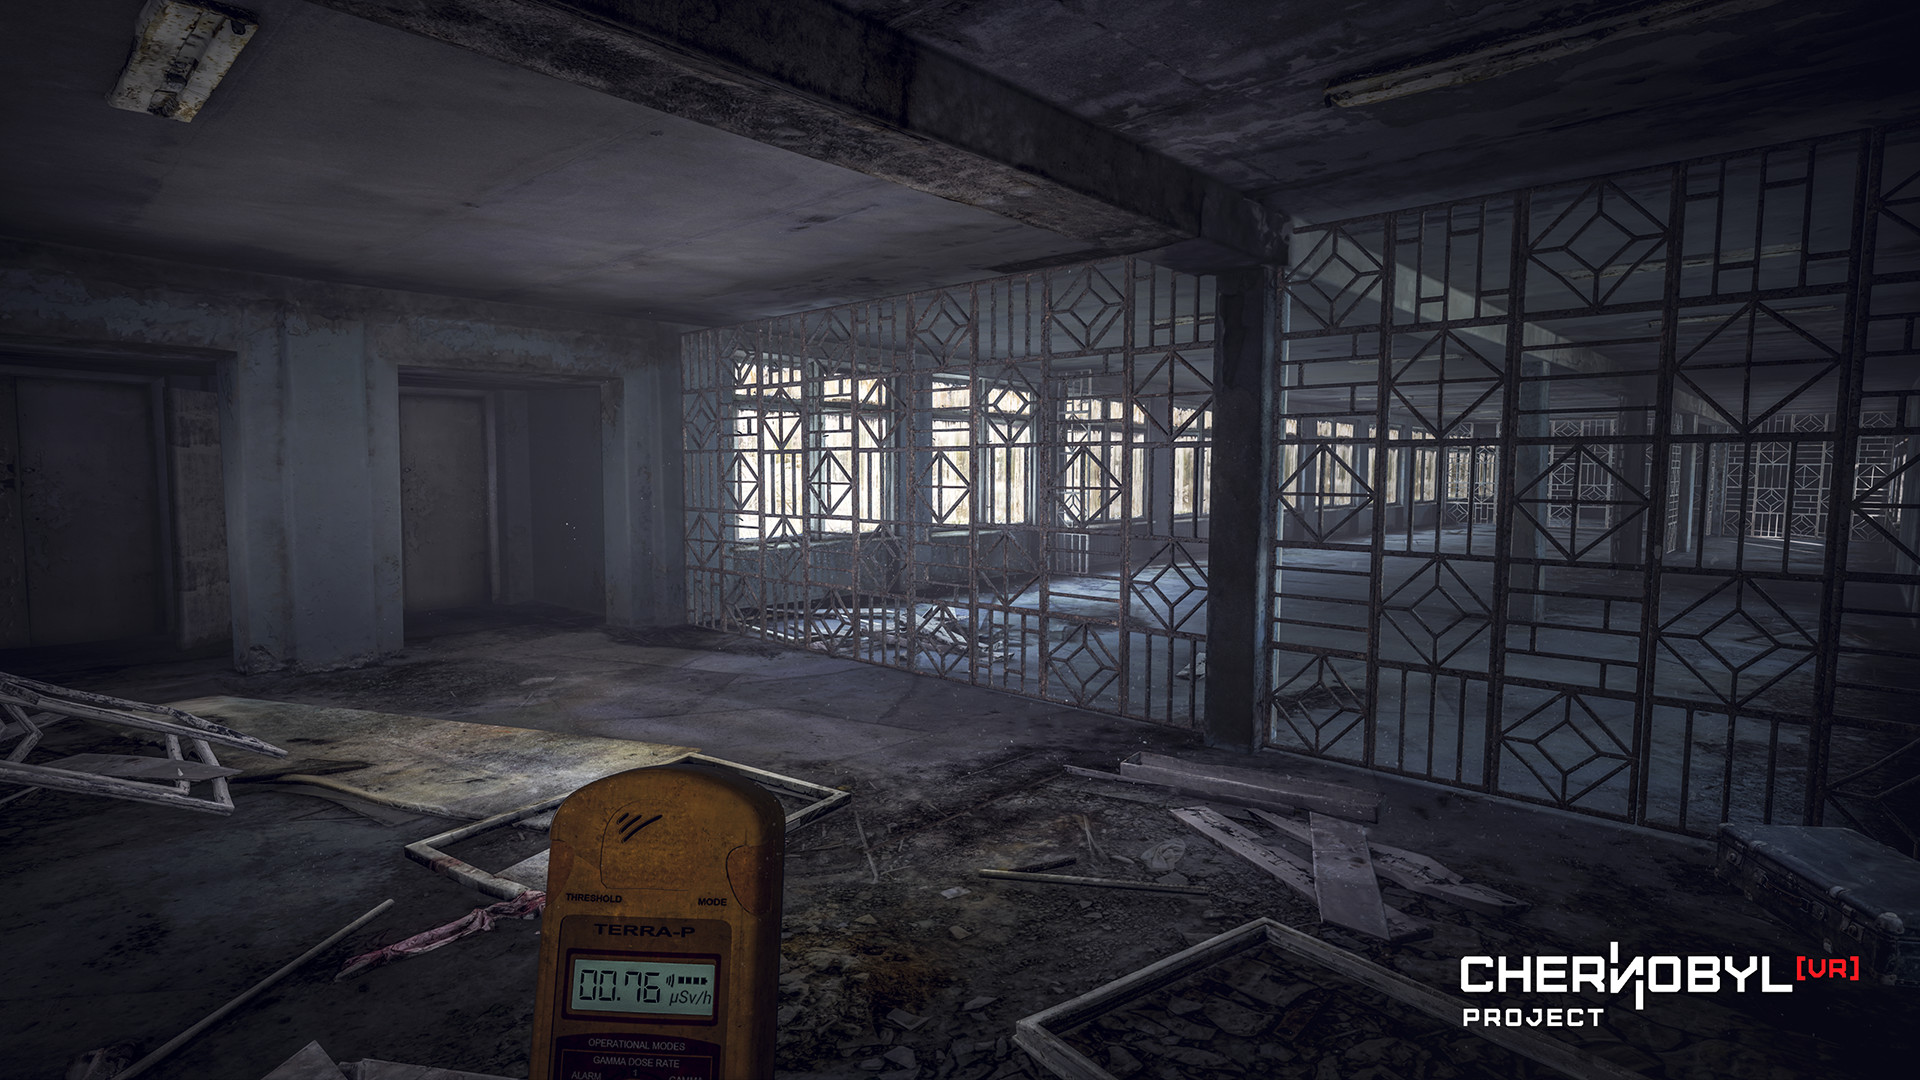 Save 50% on Chernobyl Project on